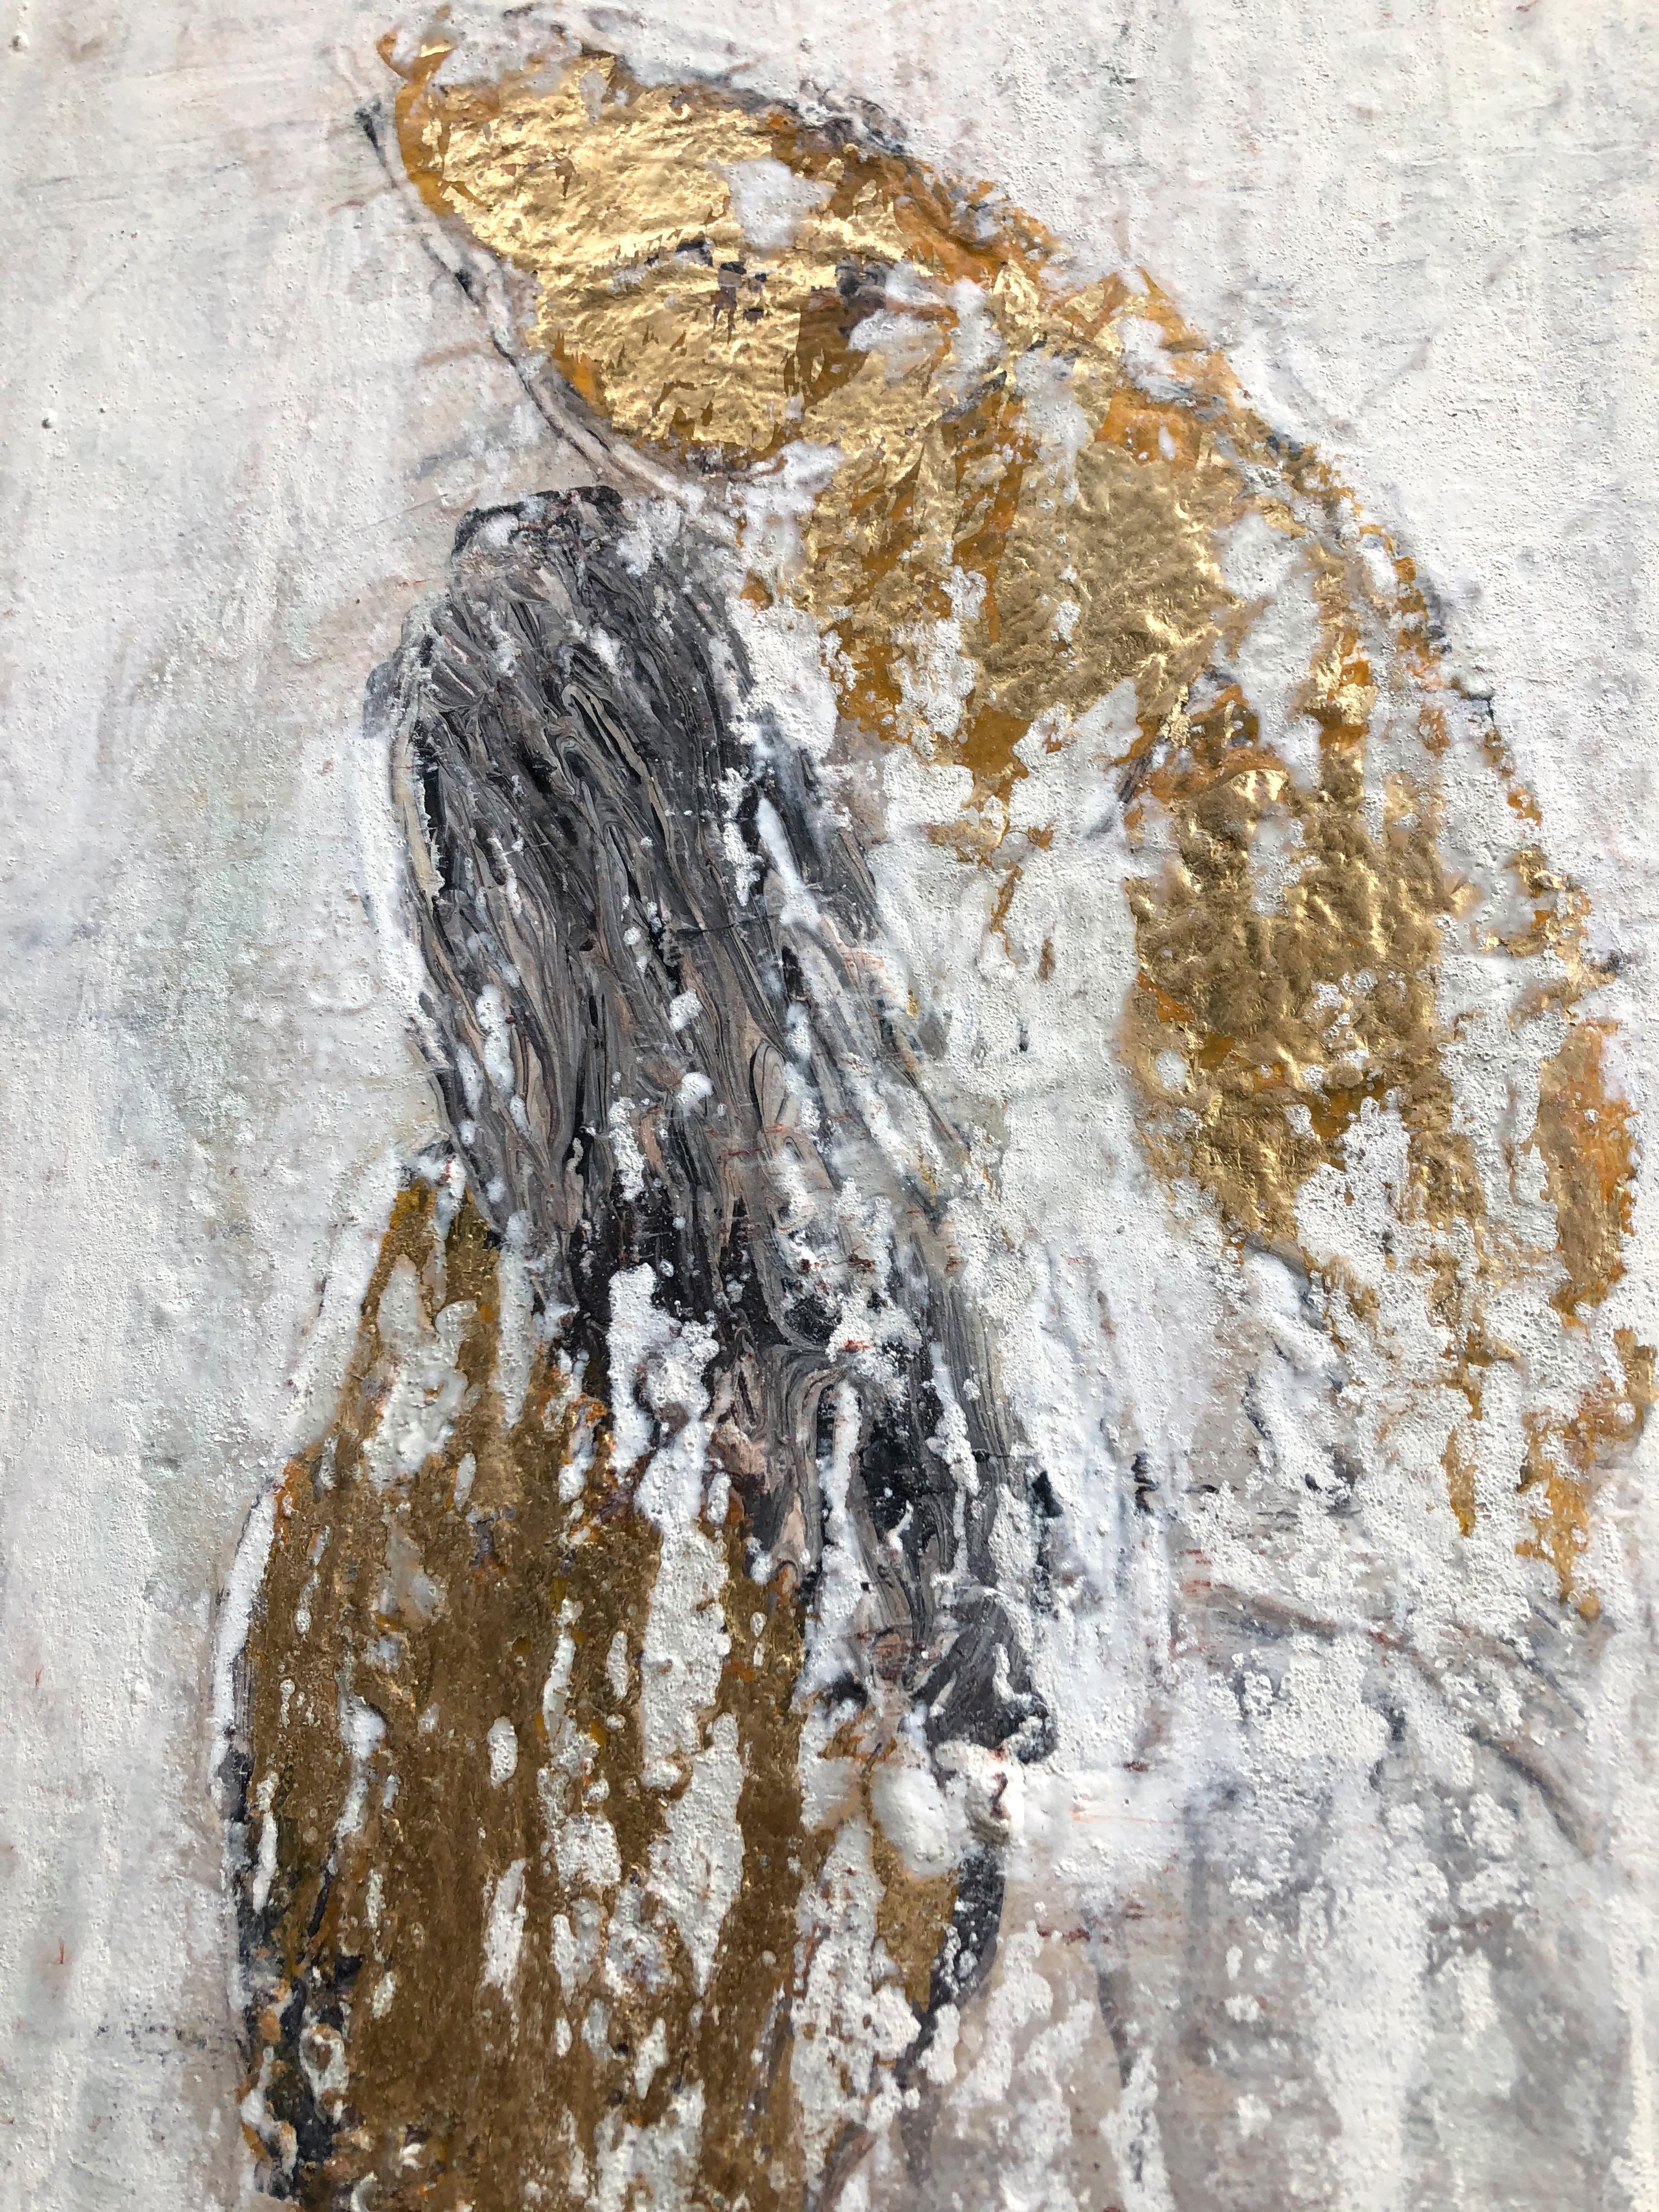 Gold Edition
Artist: Roger König b. Dessau, Germany (1968) Master student of Kurt Schönburg, HWK Halle, Germany. 
Art Awards Winner 2019 - Art Fair Leipzig
König combines modern painting with acrylic with old techniques and in this way, he connects